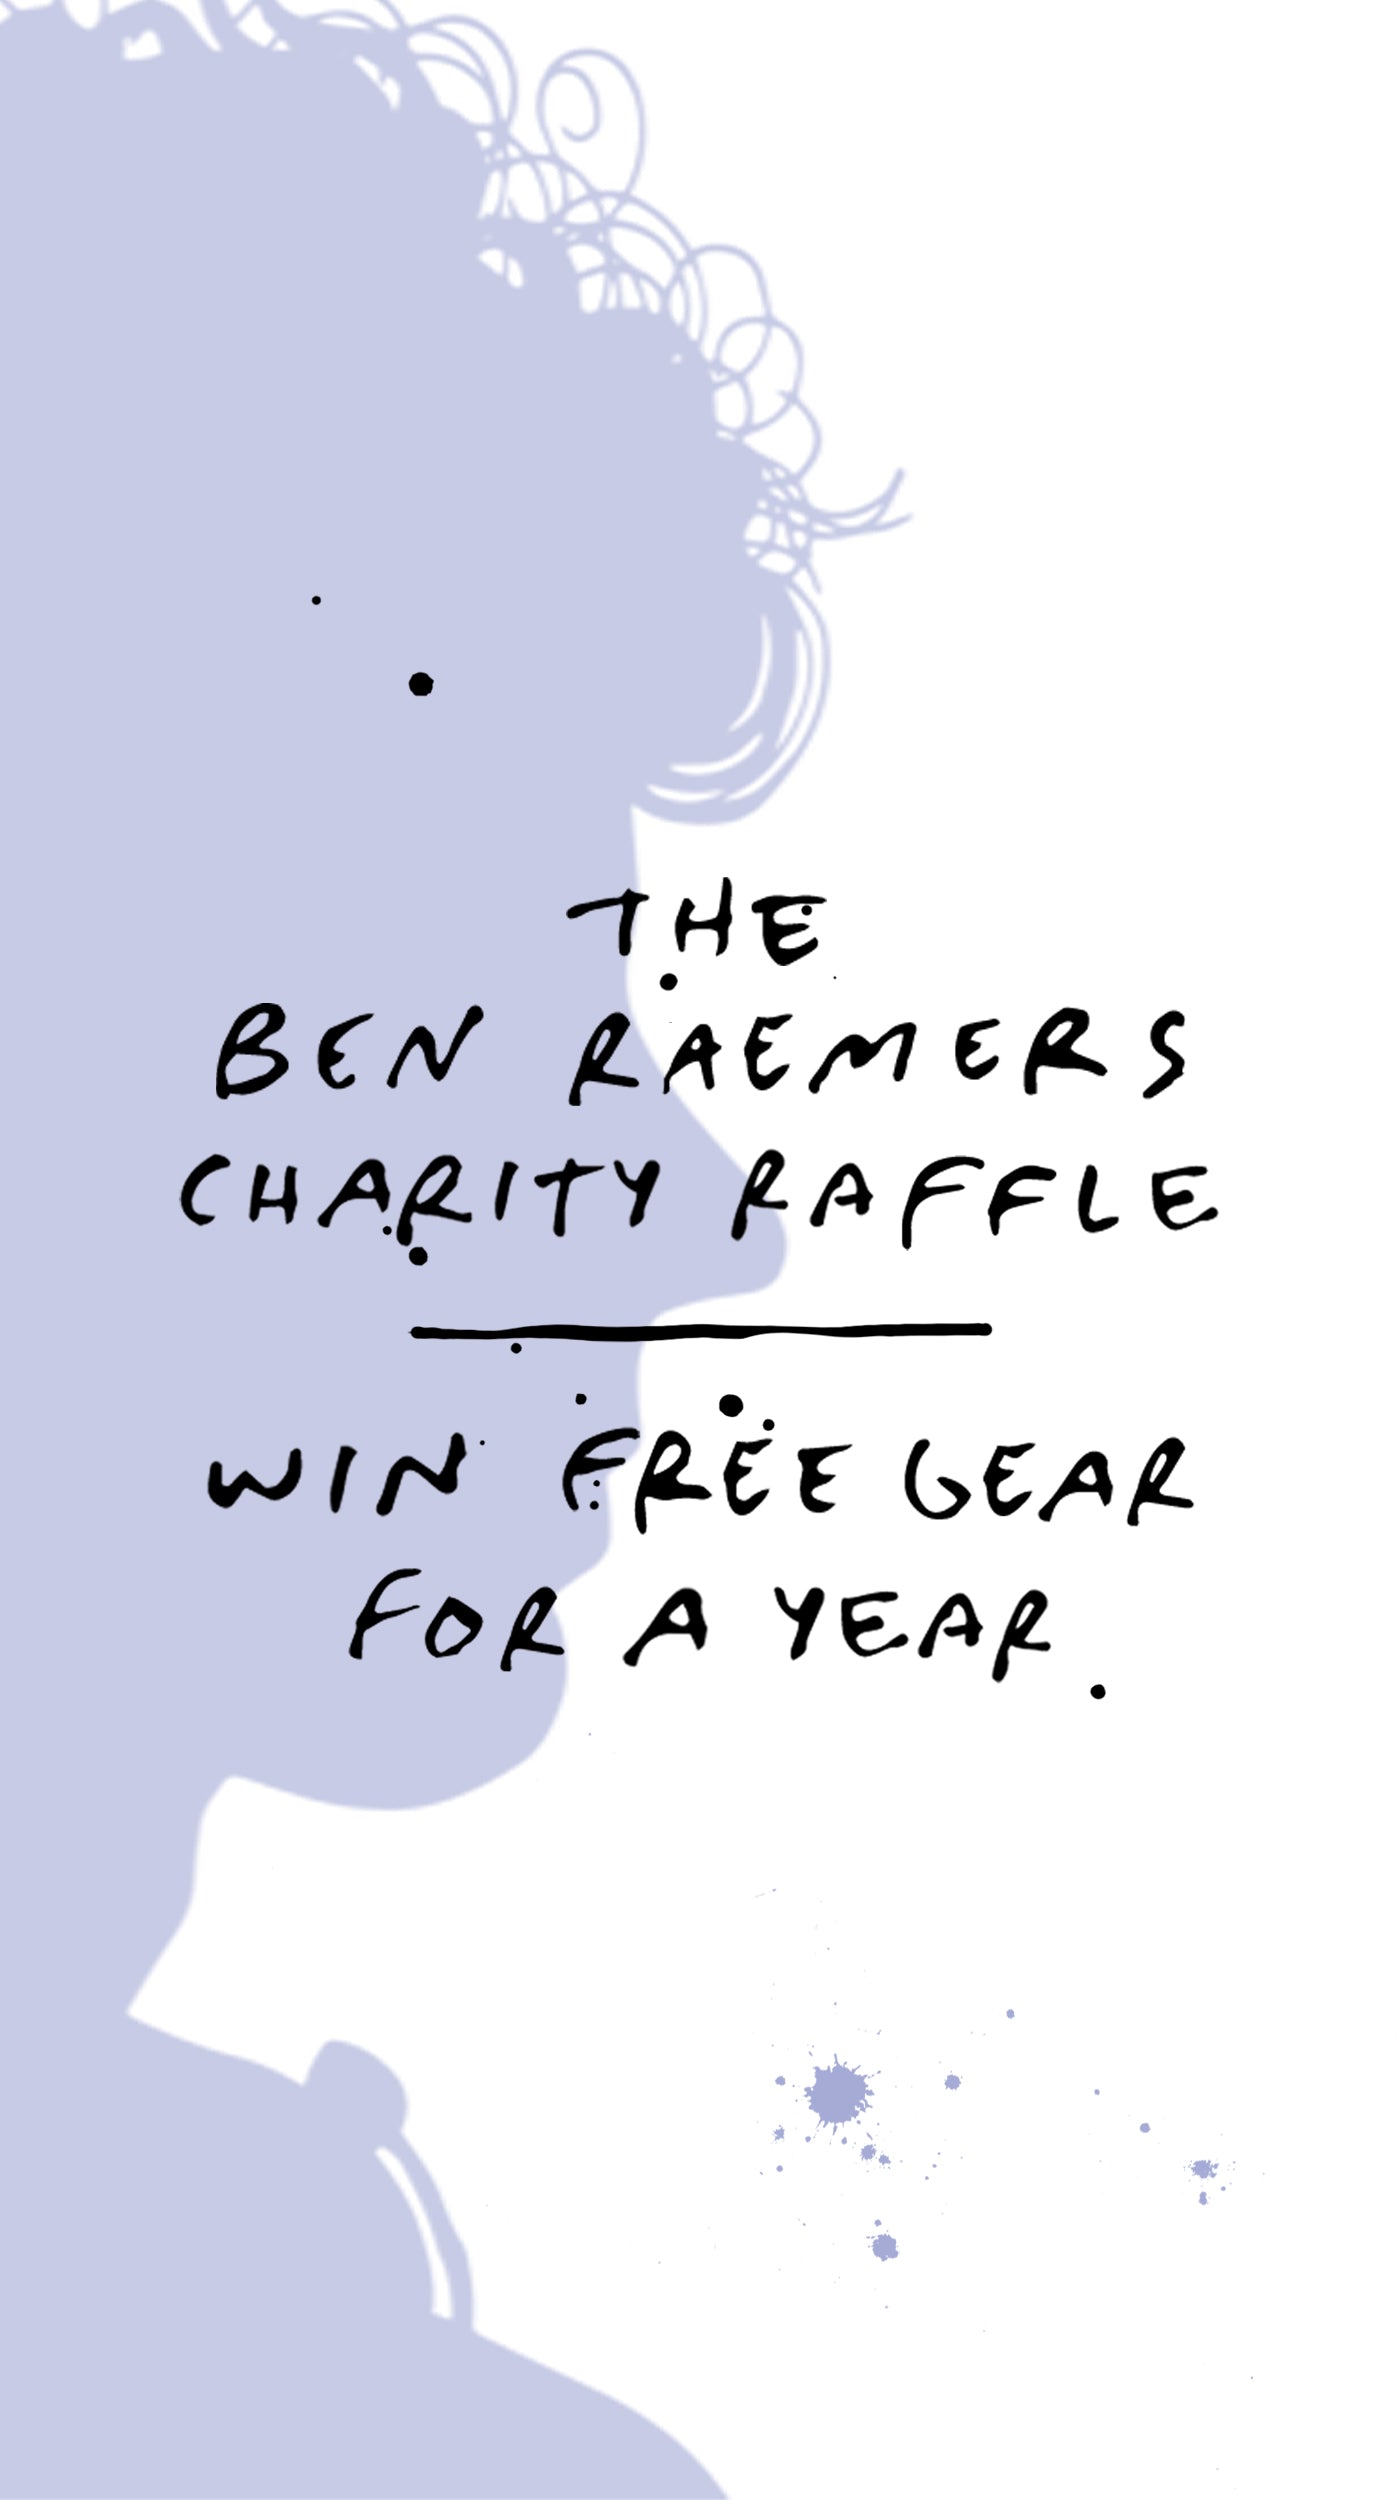 Birling the Ben Raemers Foundation Charity Raffle